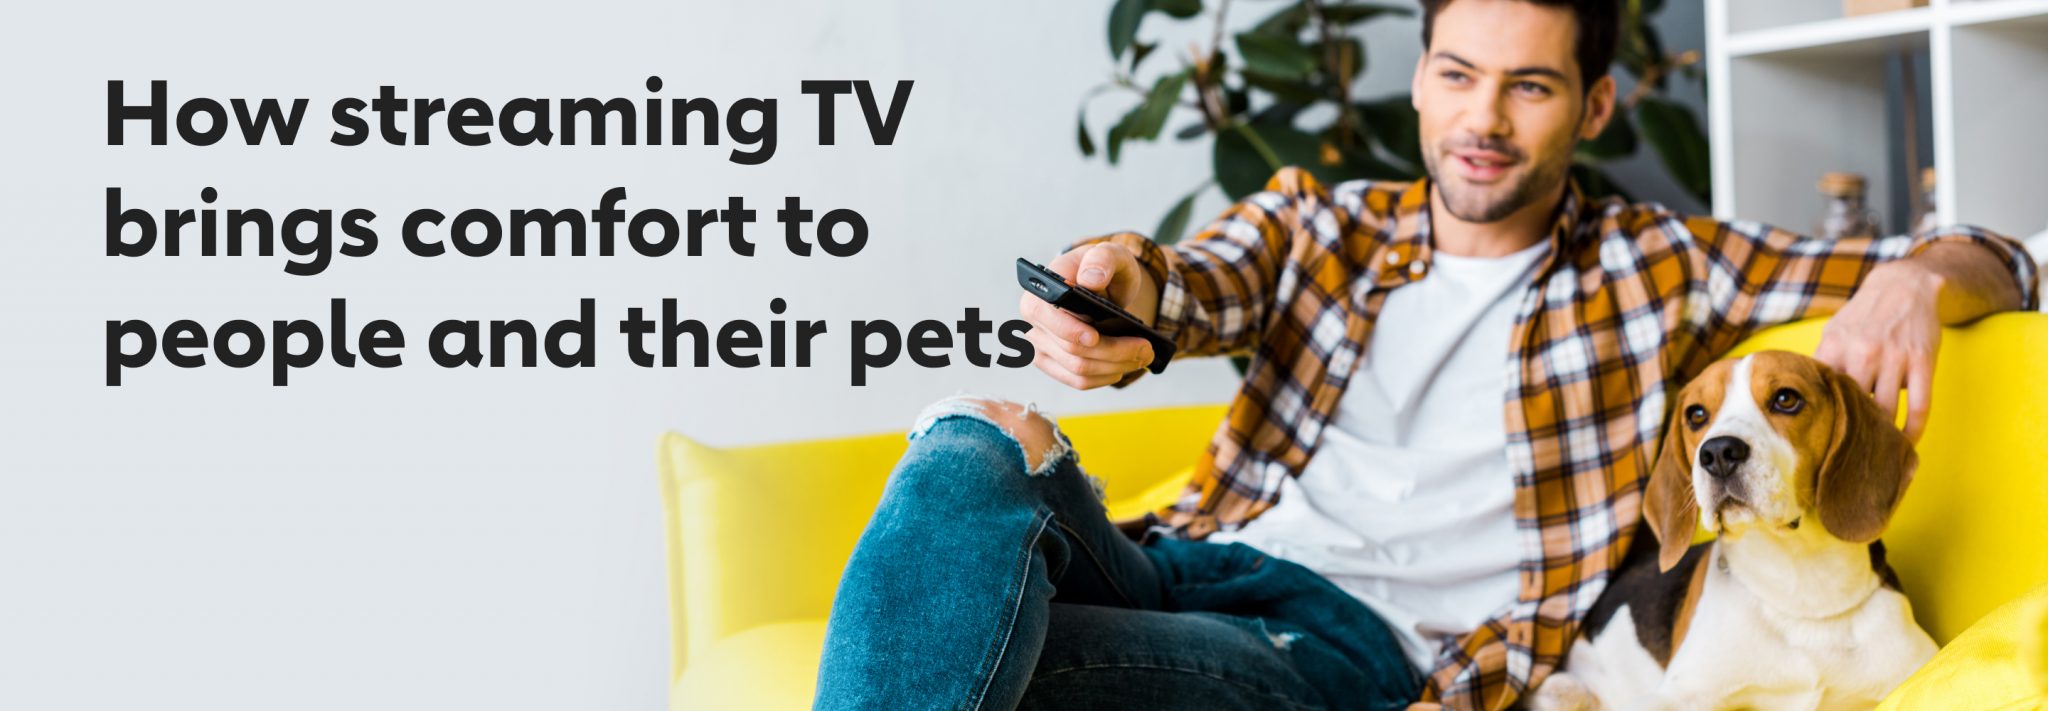 How Streaming TV Brings Comfort to People and Their Pets